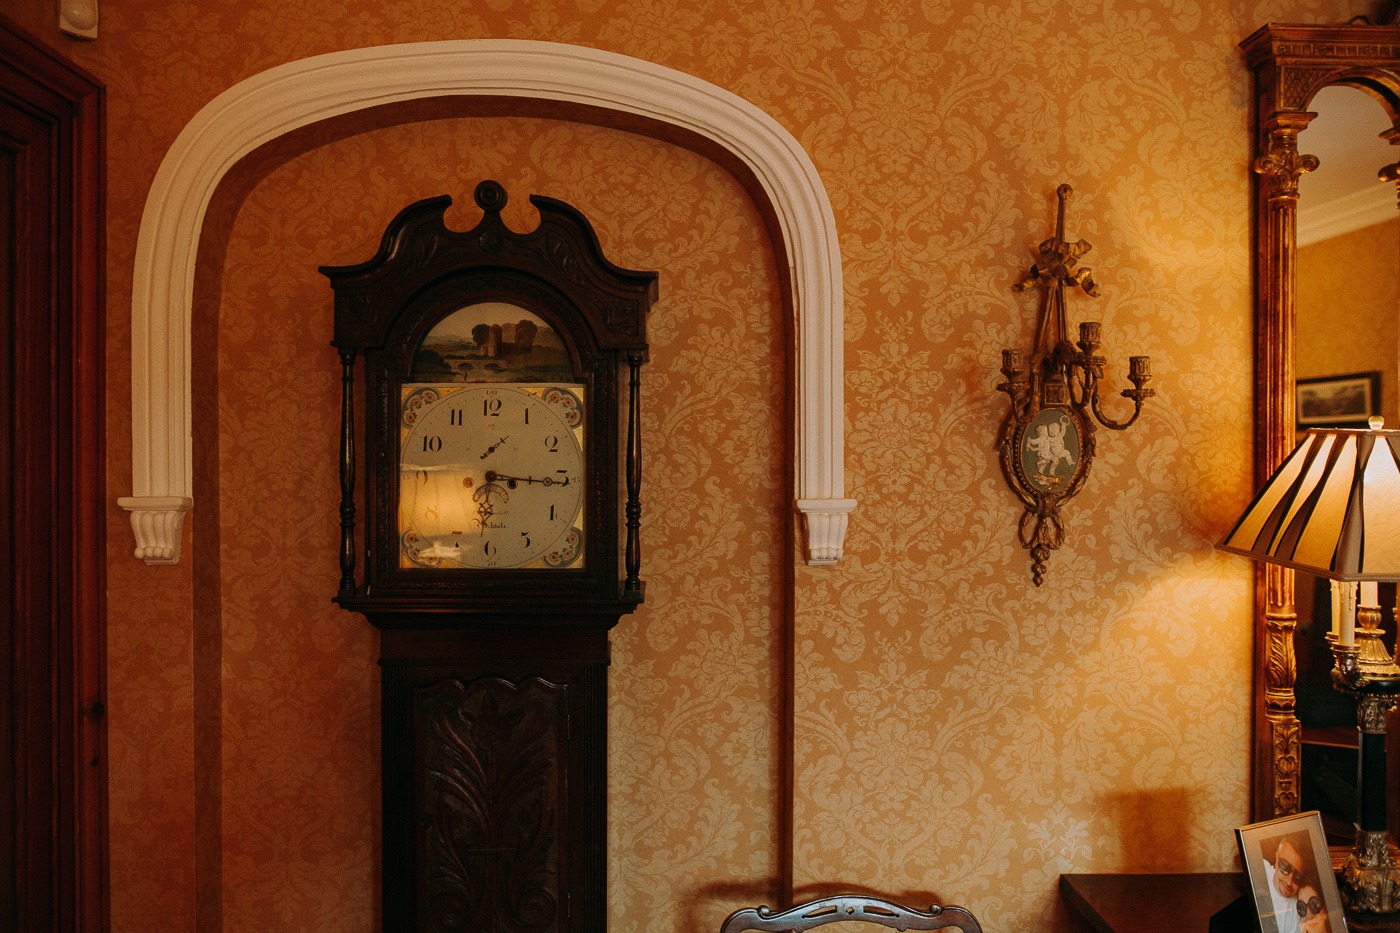 A clock sitting in the middle of a room